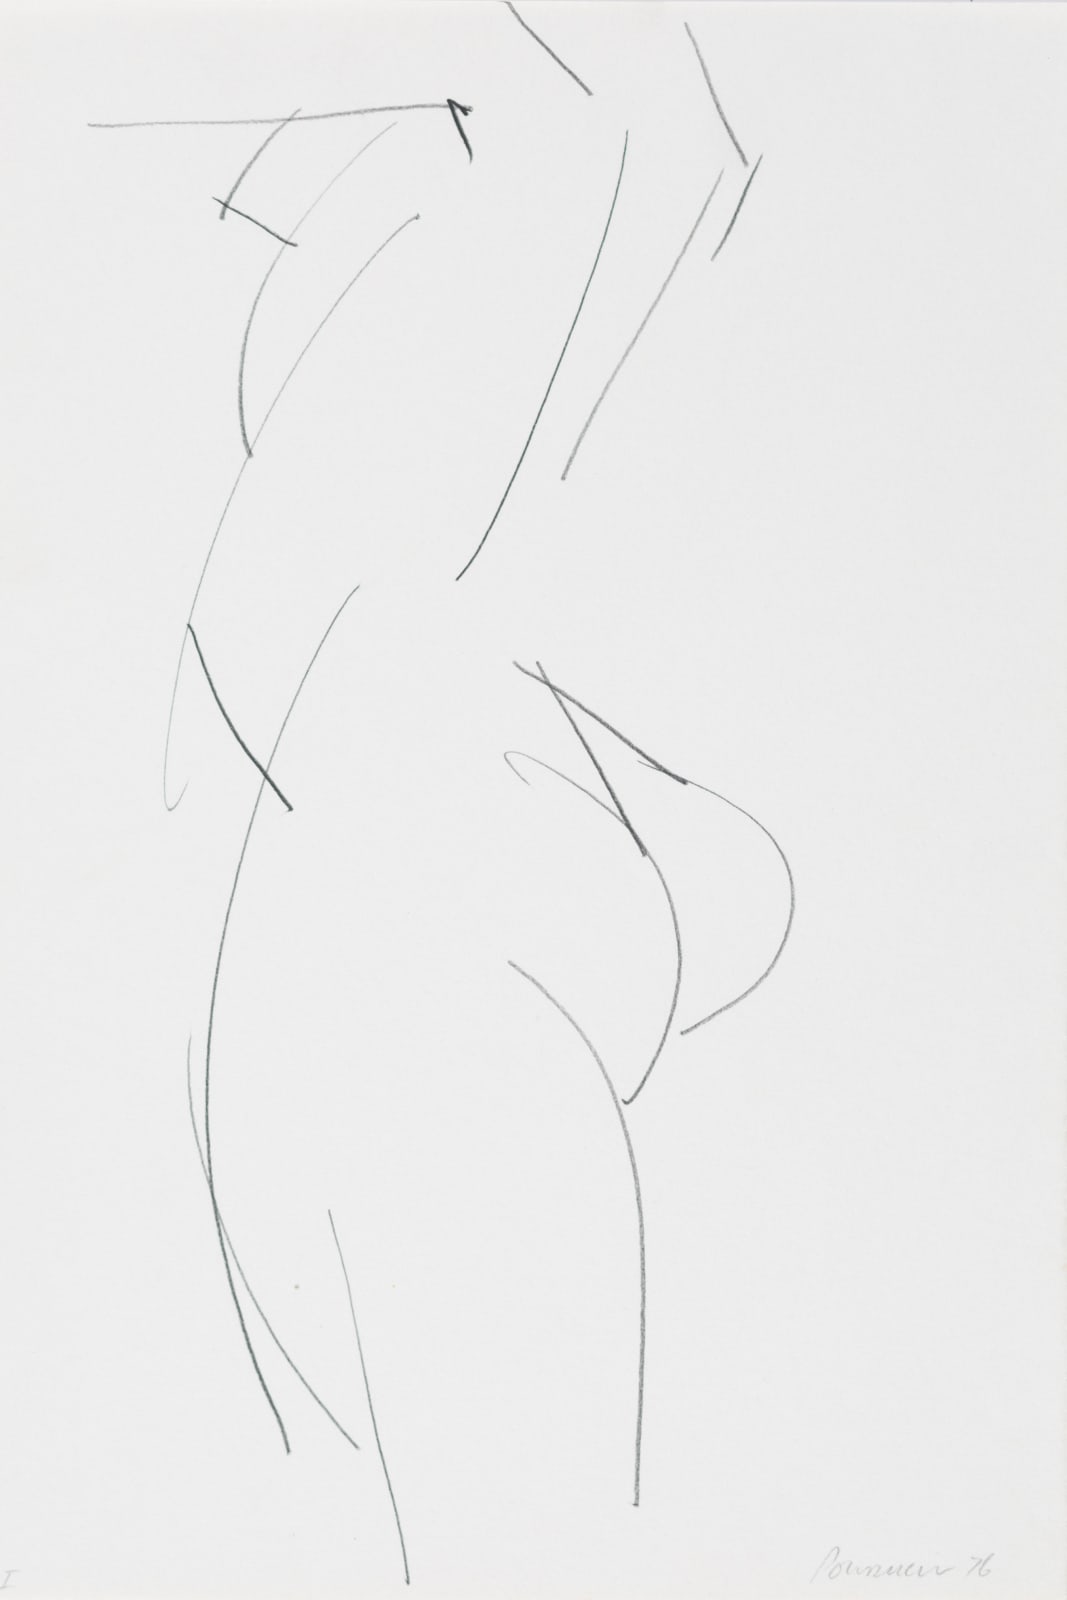 Estate of Peter Powditch, Life Drawing 63, 1976